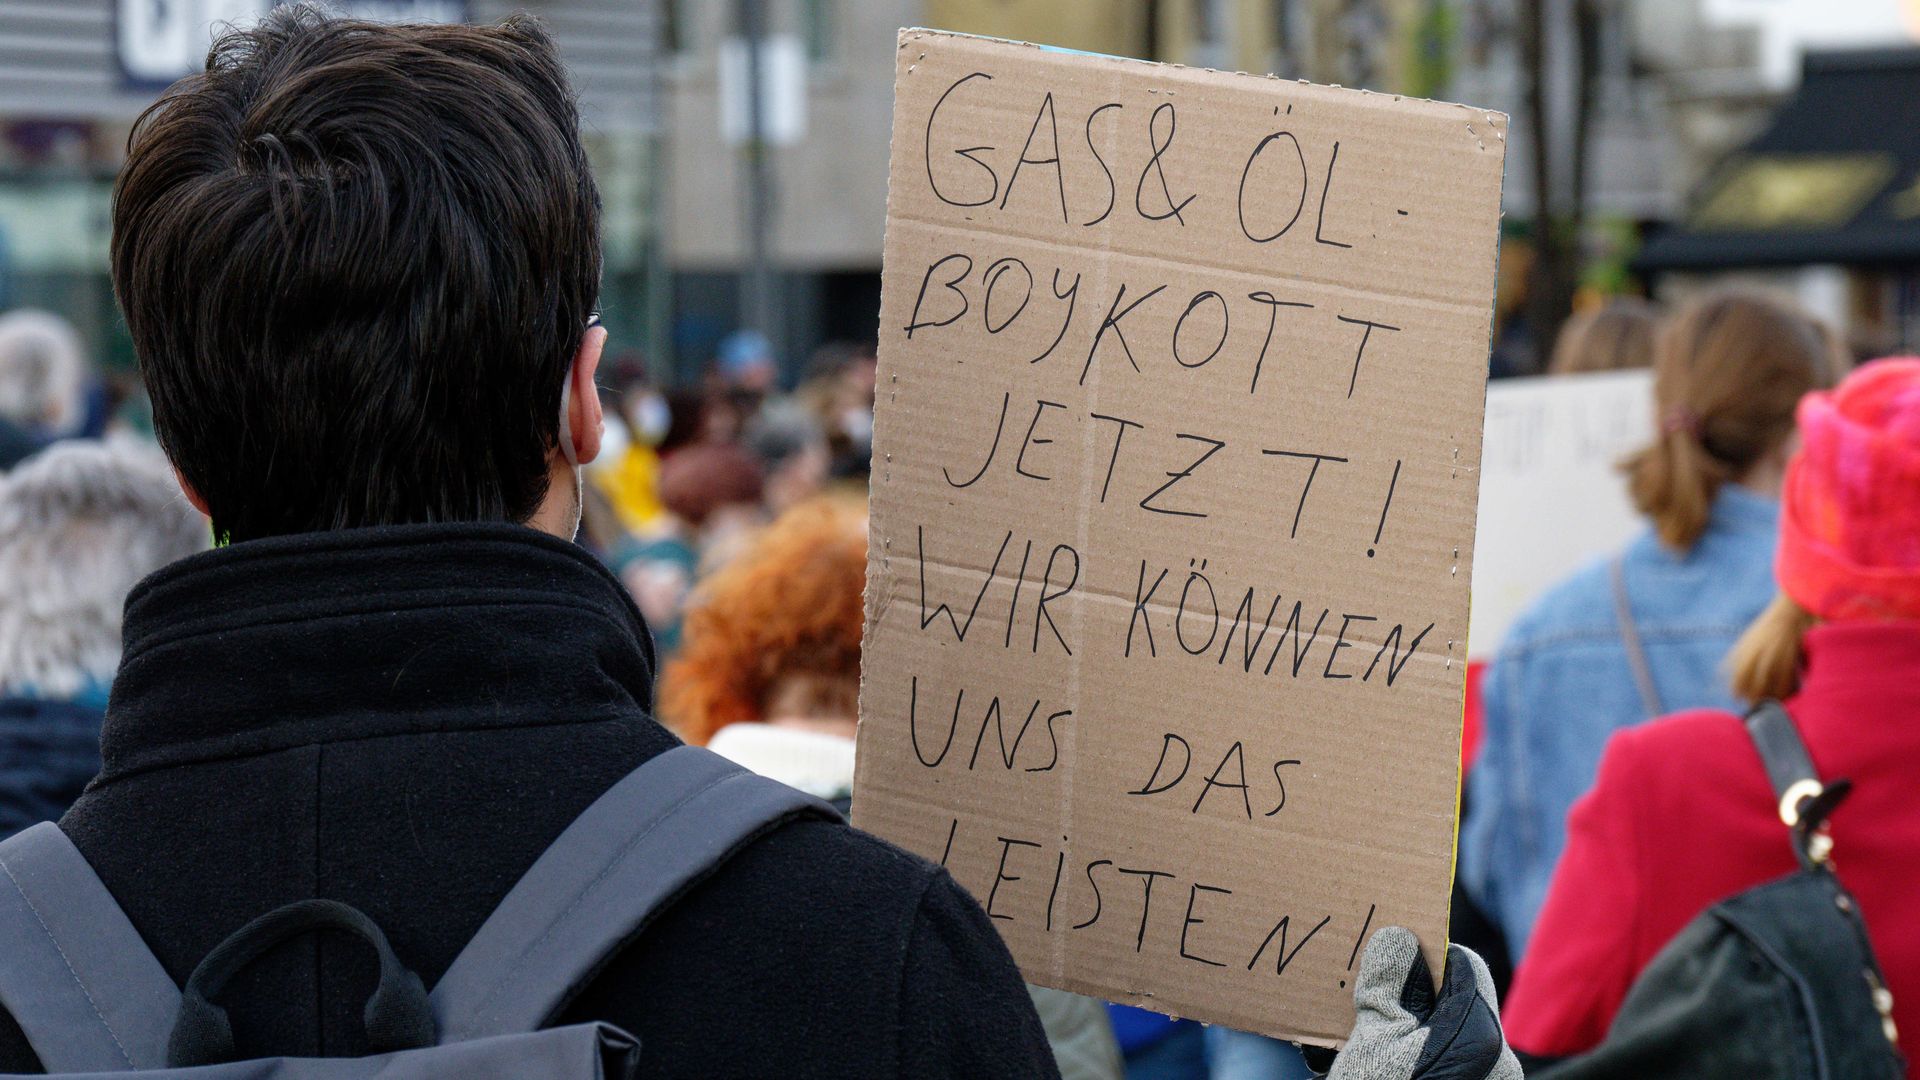 Germans are seen calling for a Russian oil and gas boycott in protest of the Ukraine invasion.